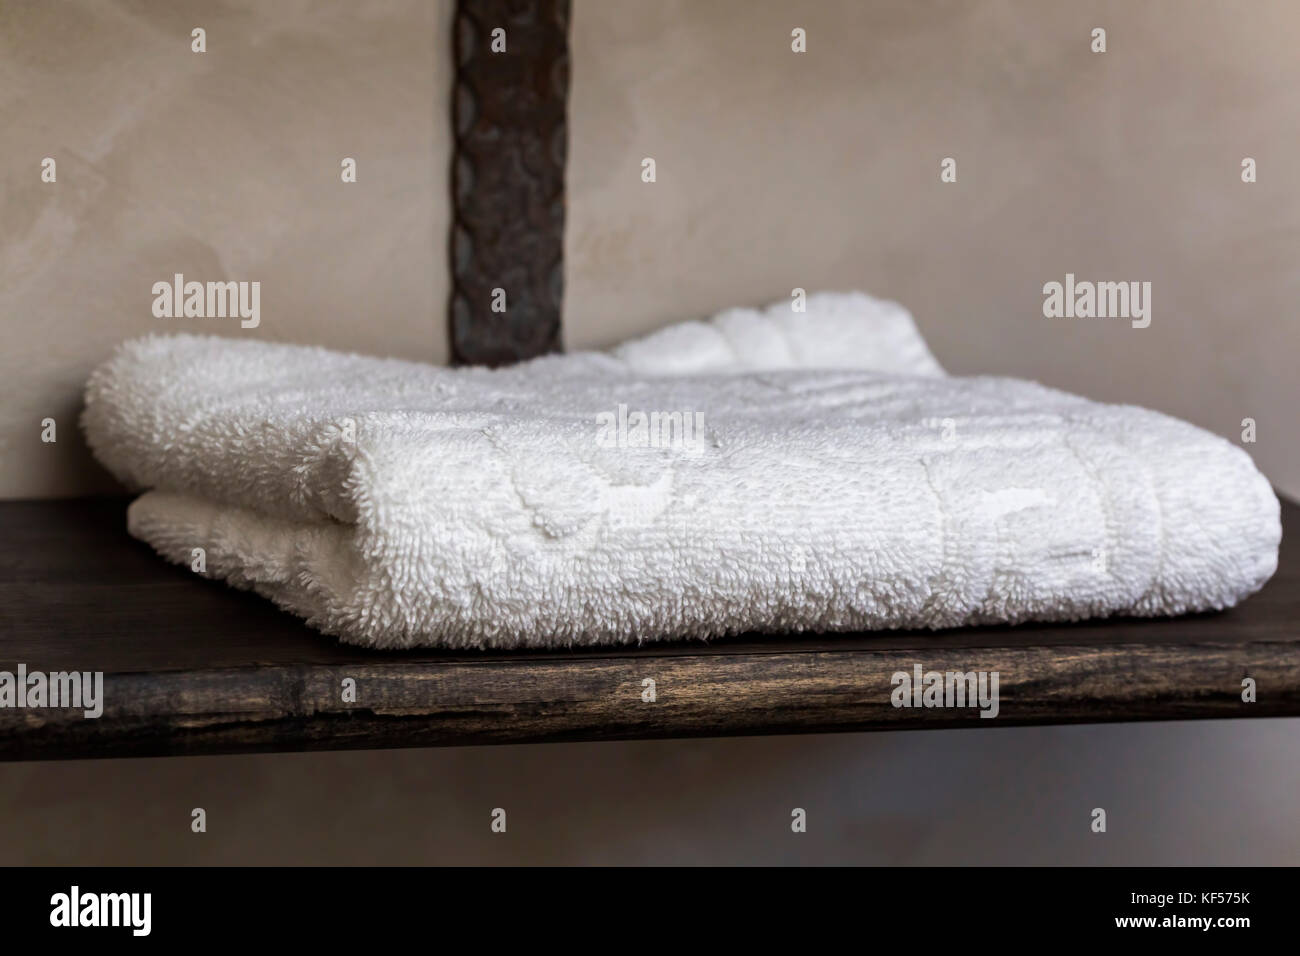 One white towel on wooden support Stock Photo